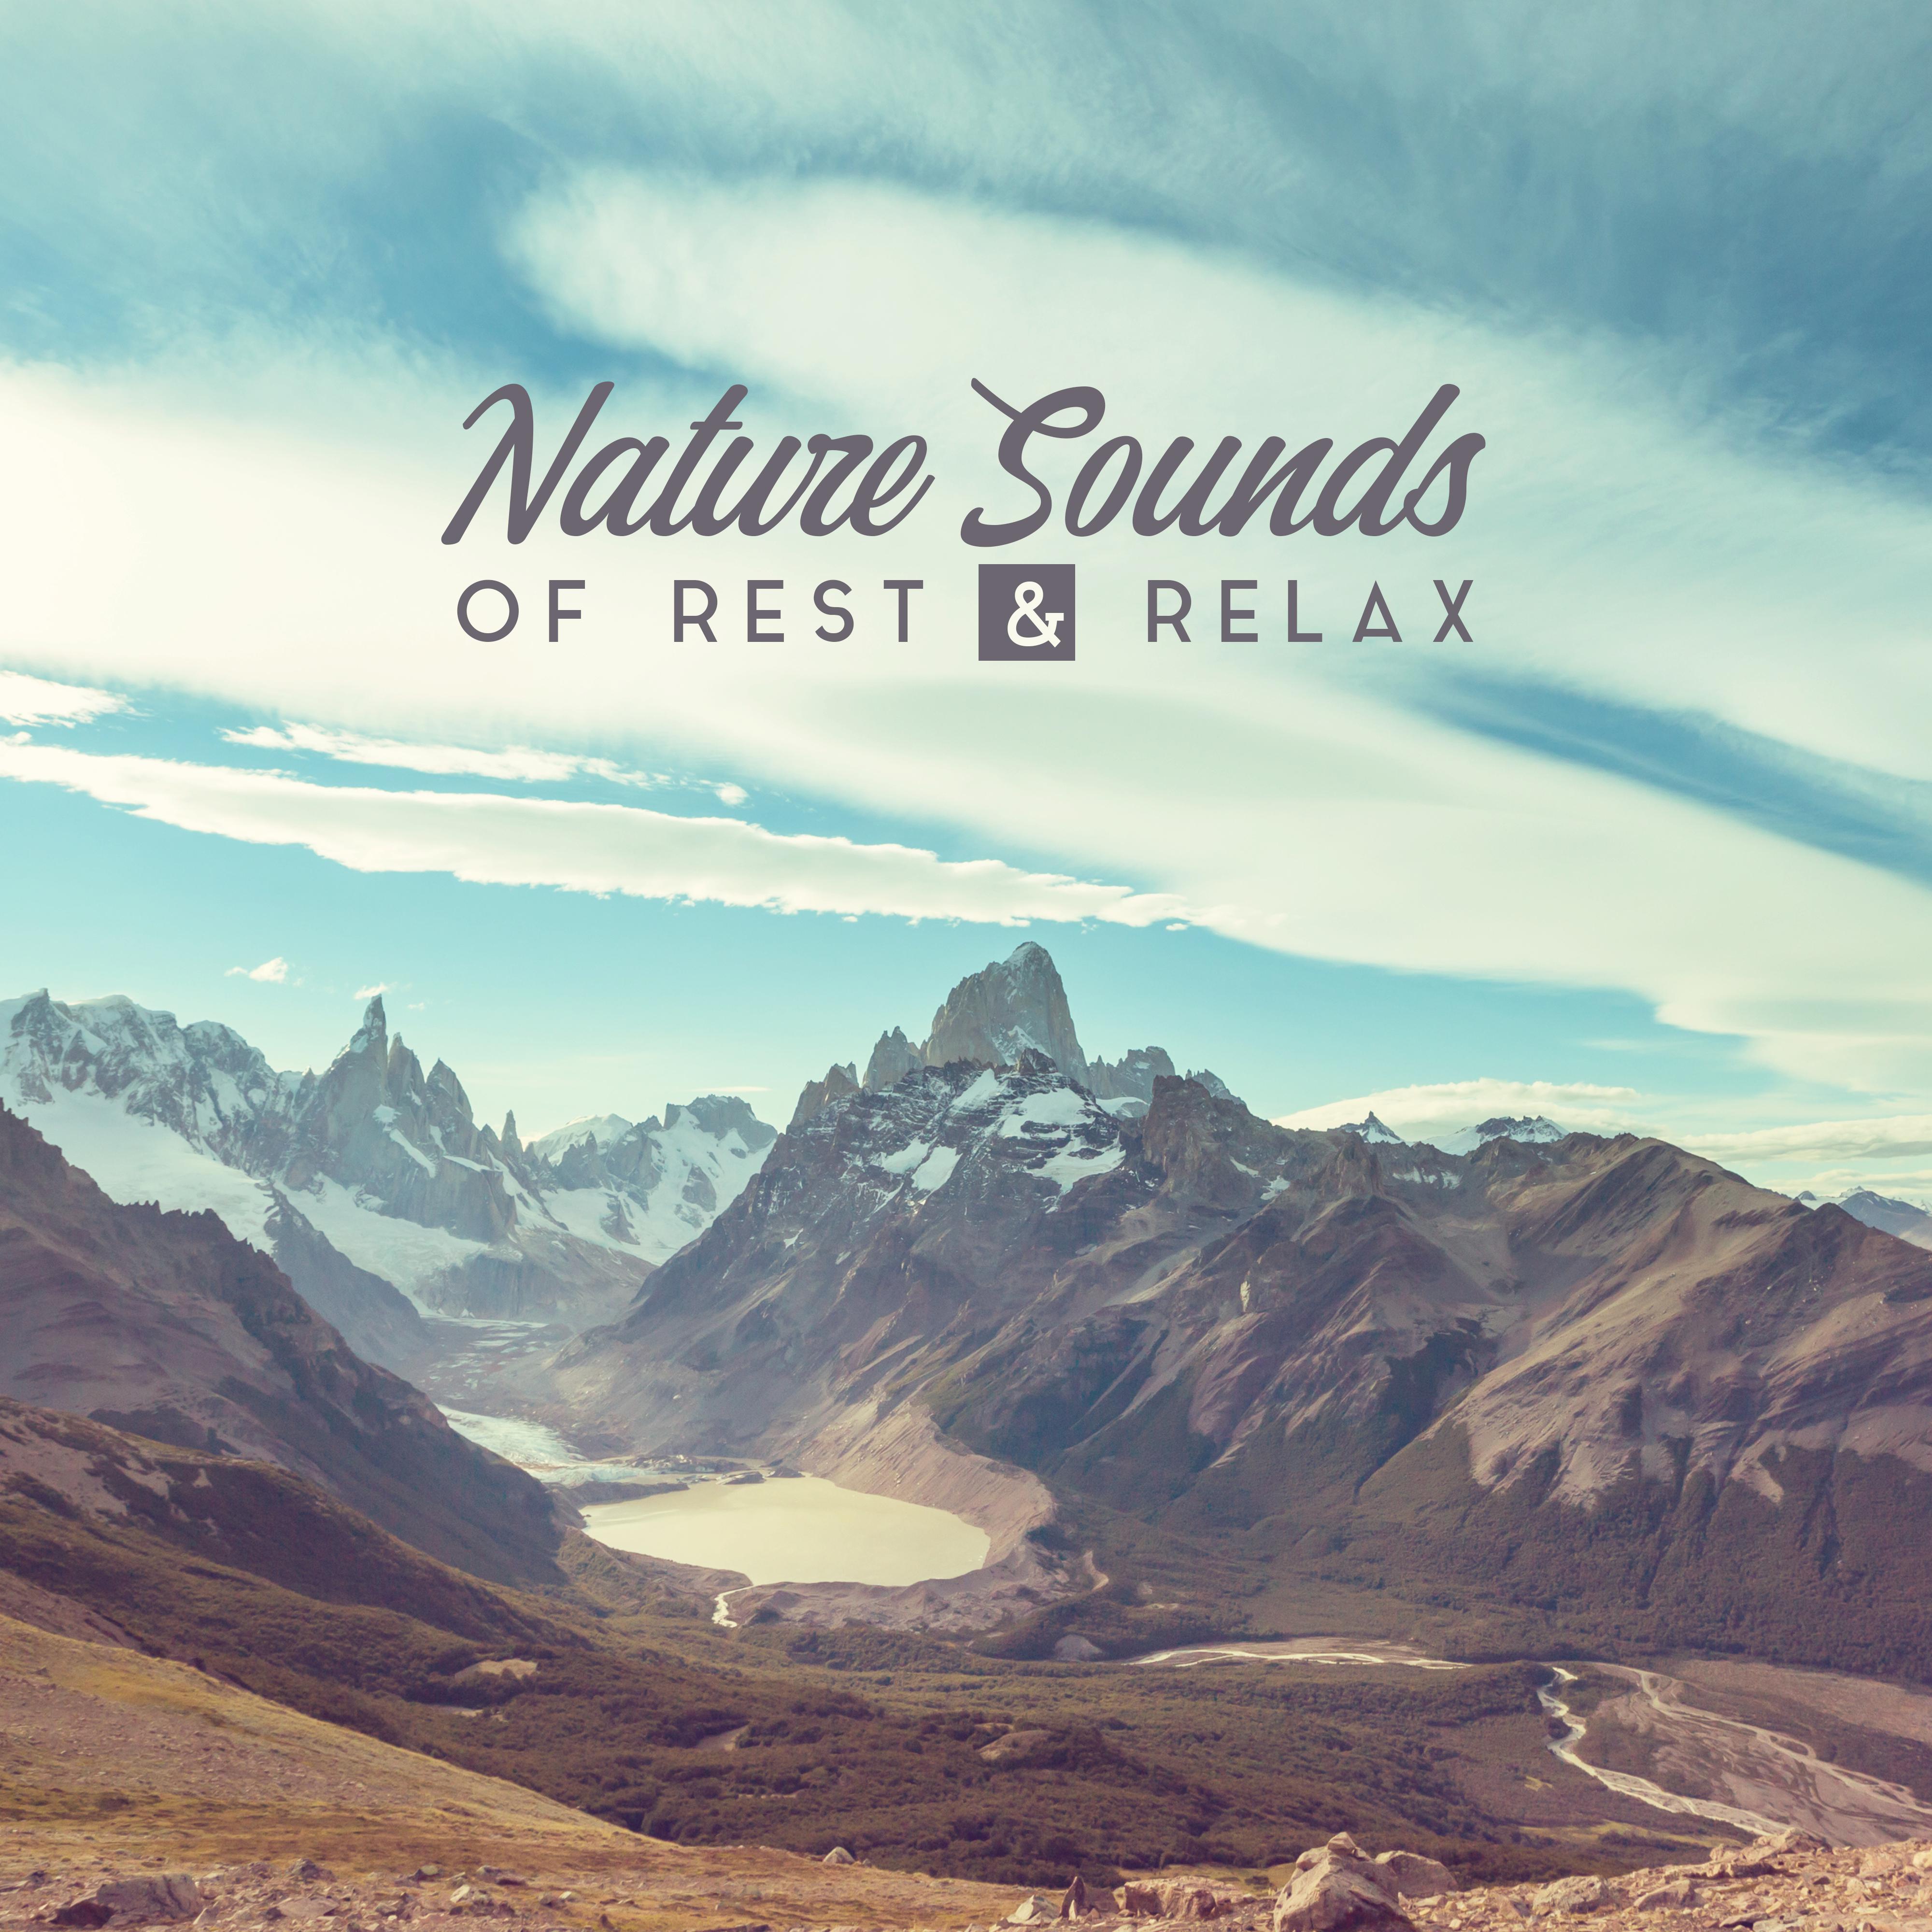 Nature Sounds of Rest & Relax: 2019 New Age Music with Nature Sounds for Relaxation, Rest After Work, Calming Down & Fight with Stress